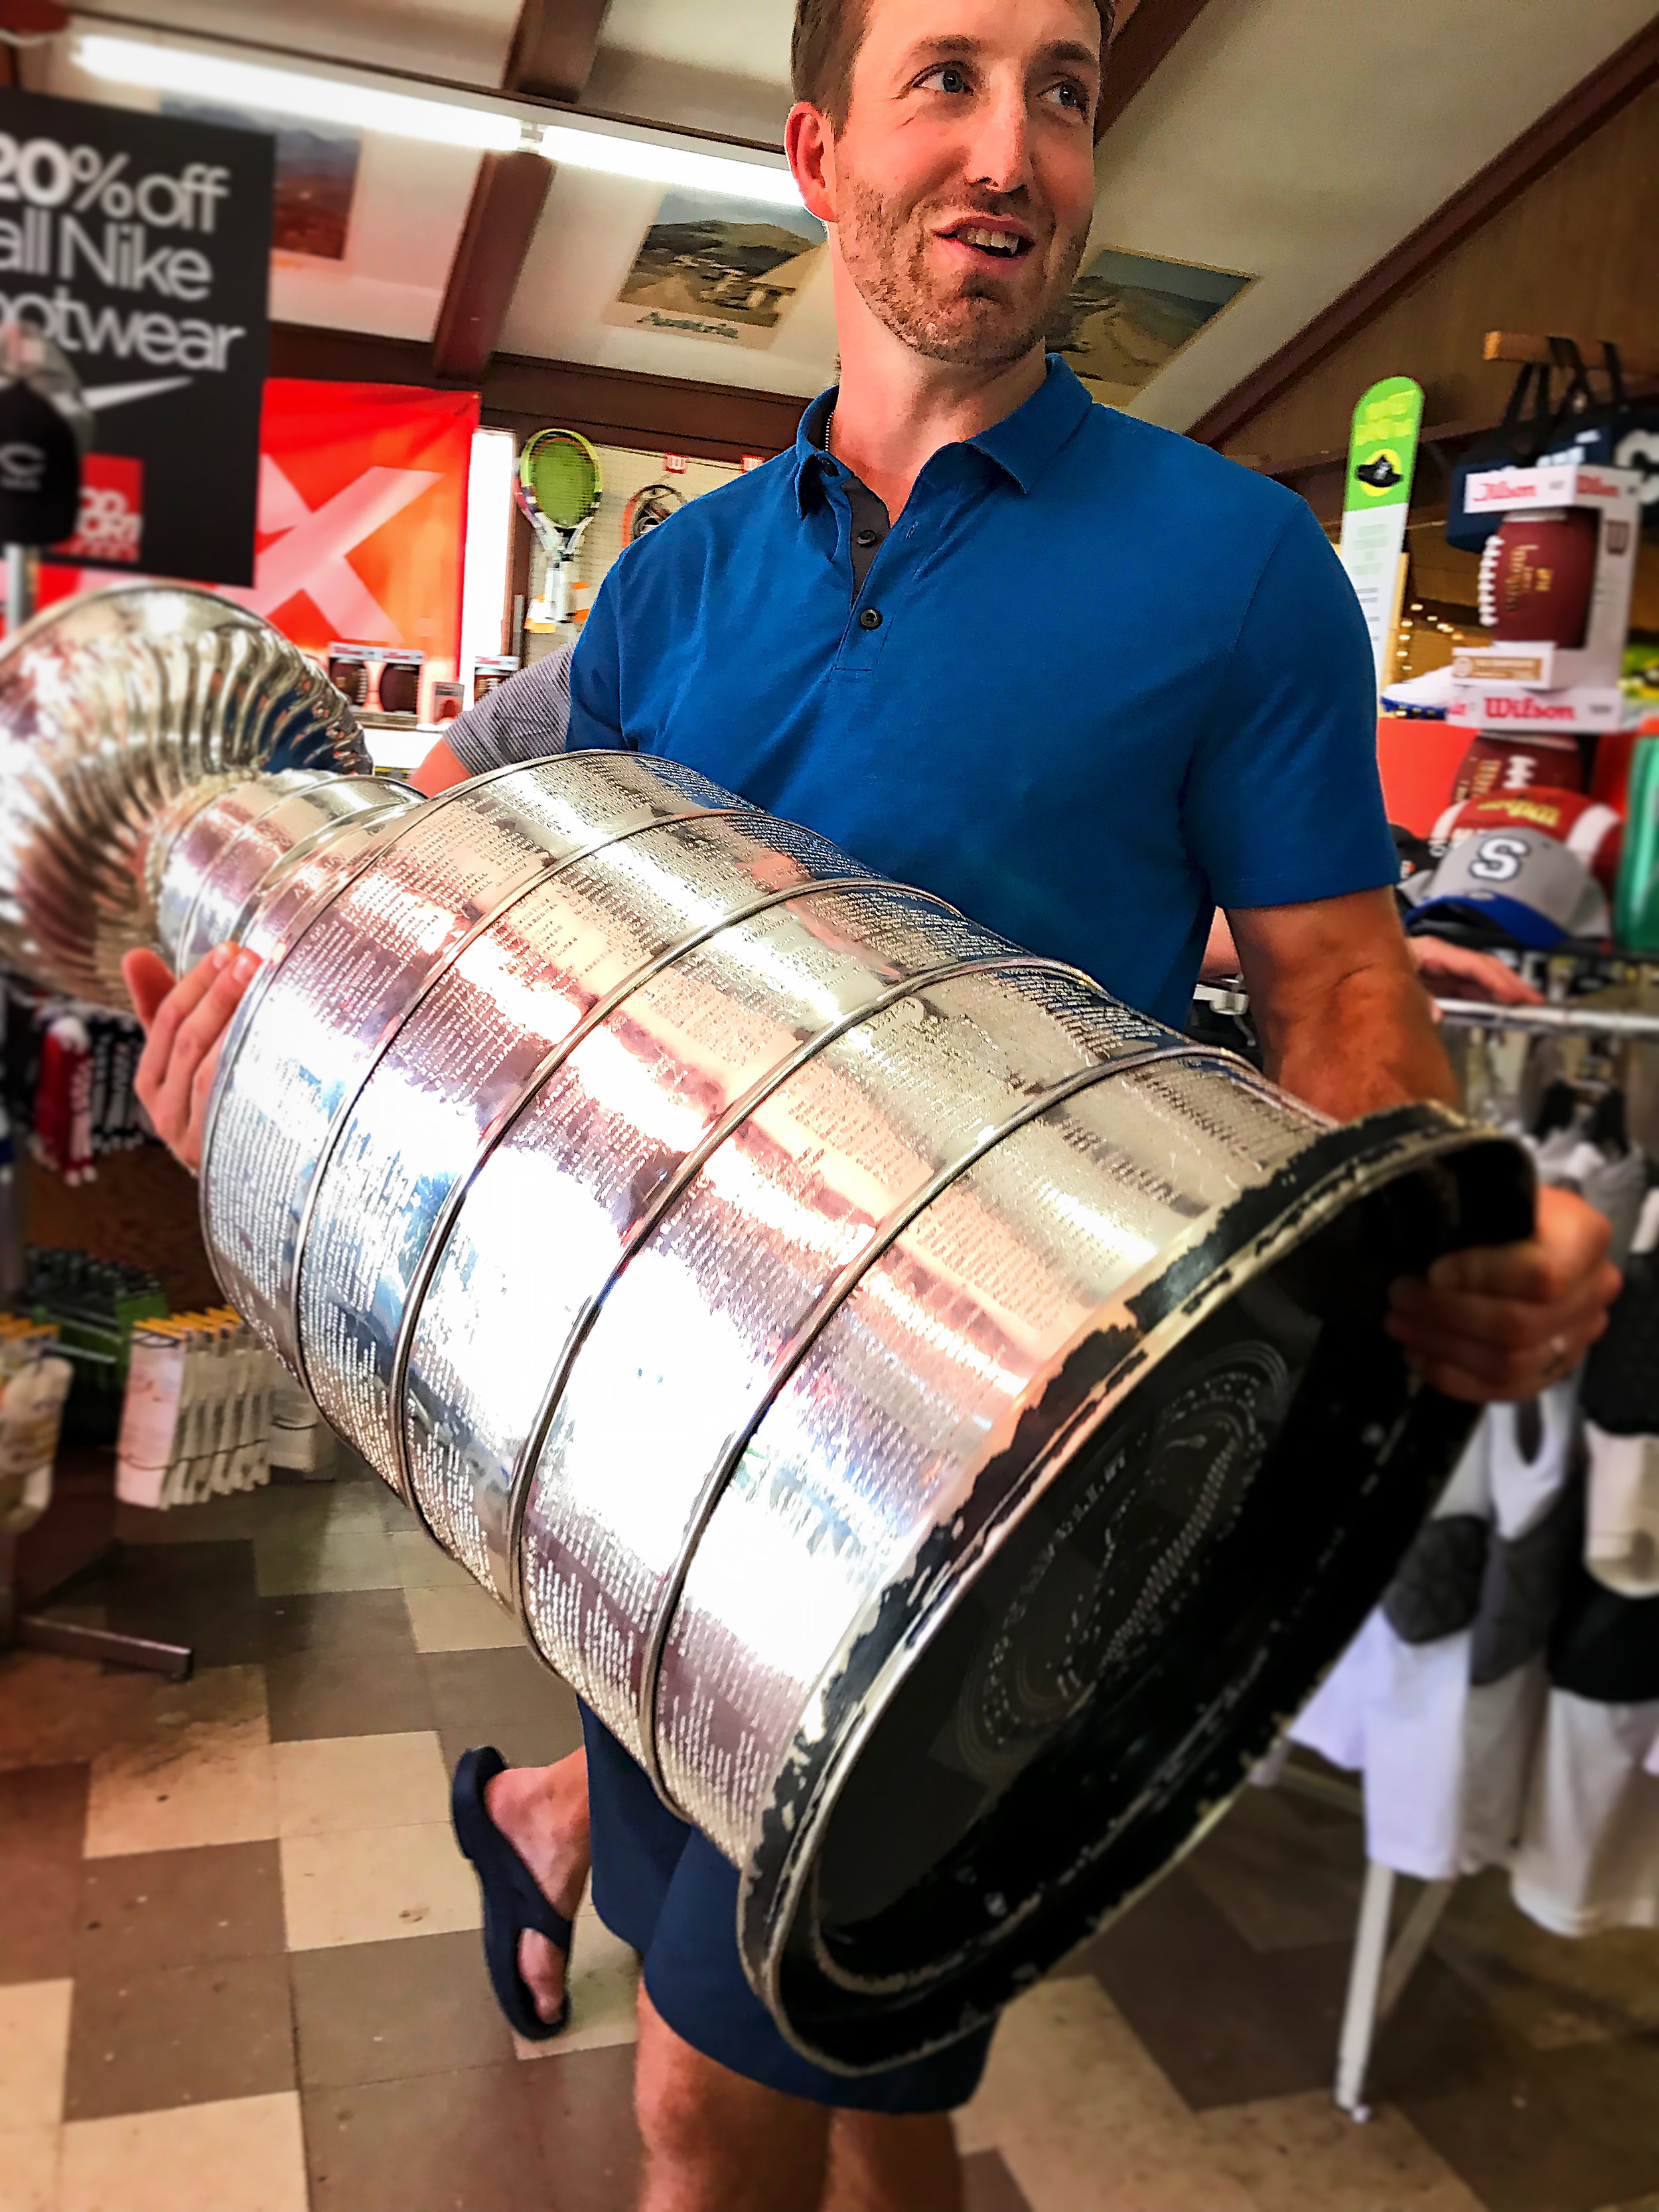 The Holy Grail of Sport - Lord Stanley's Cup